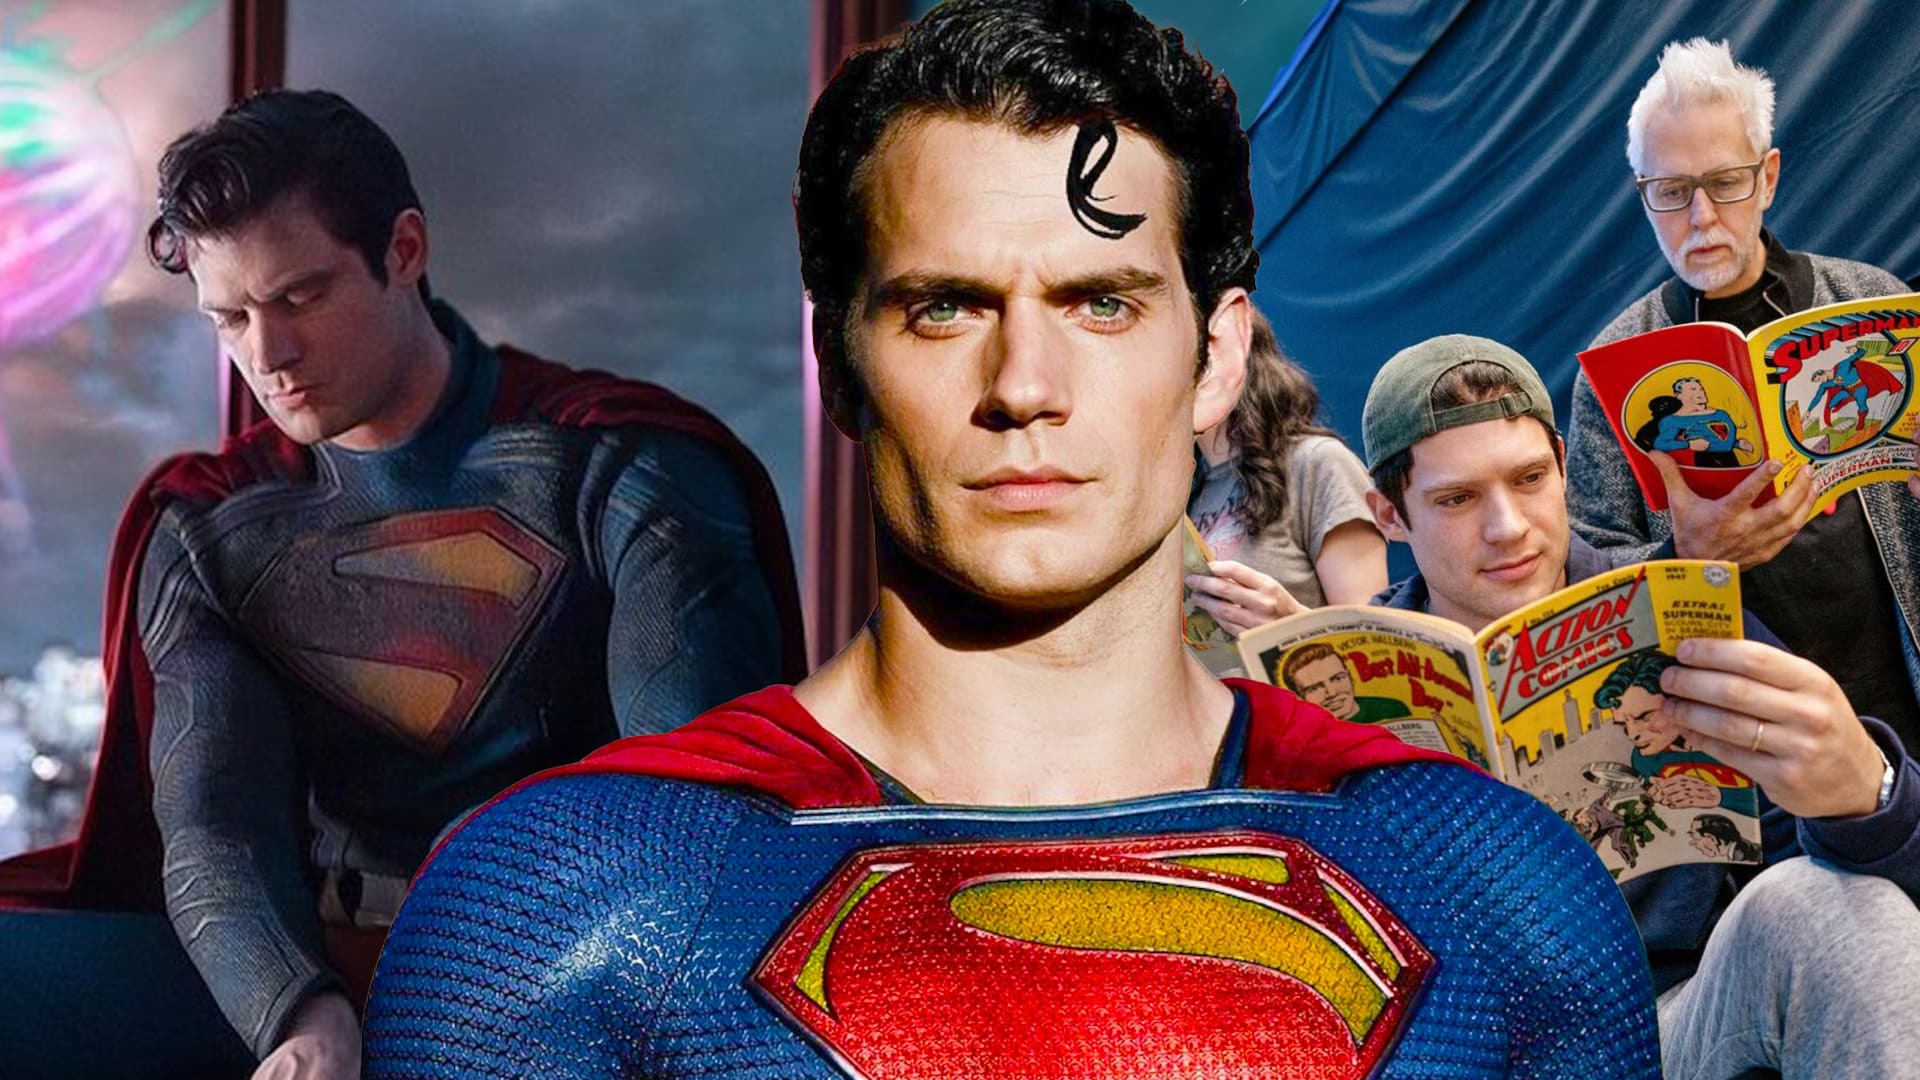 Henry Cavill's Superman Suit Is Better Than David Corenswet's